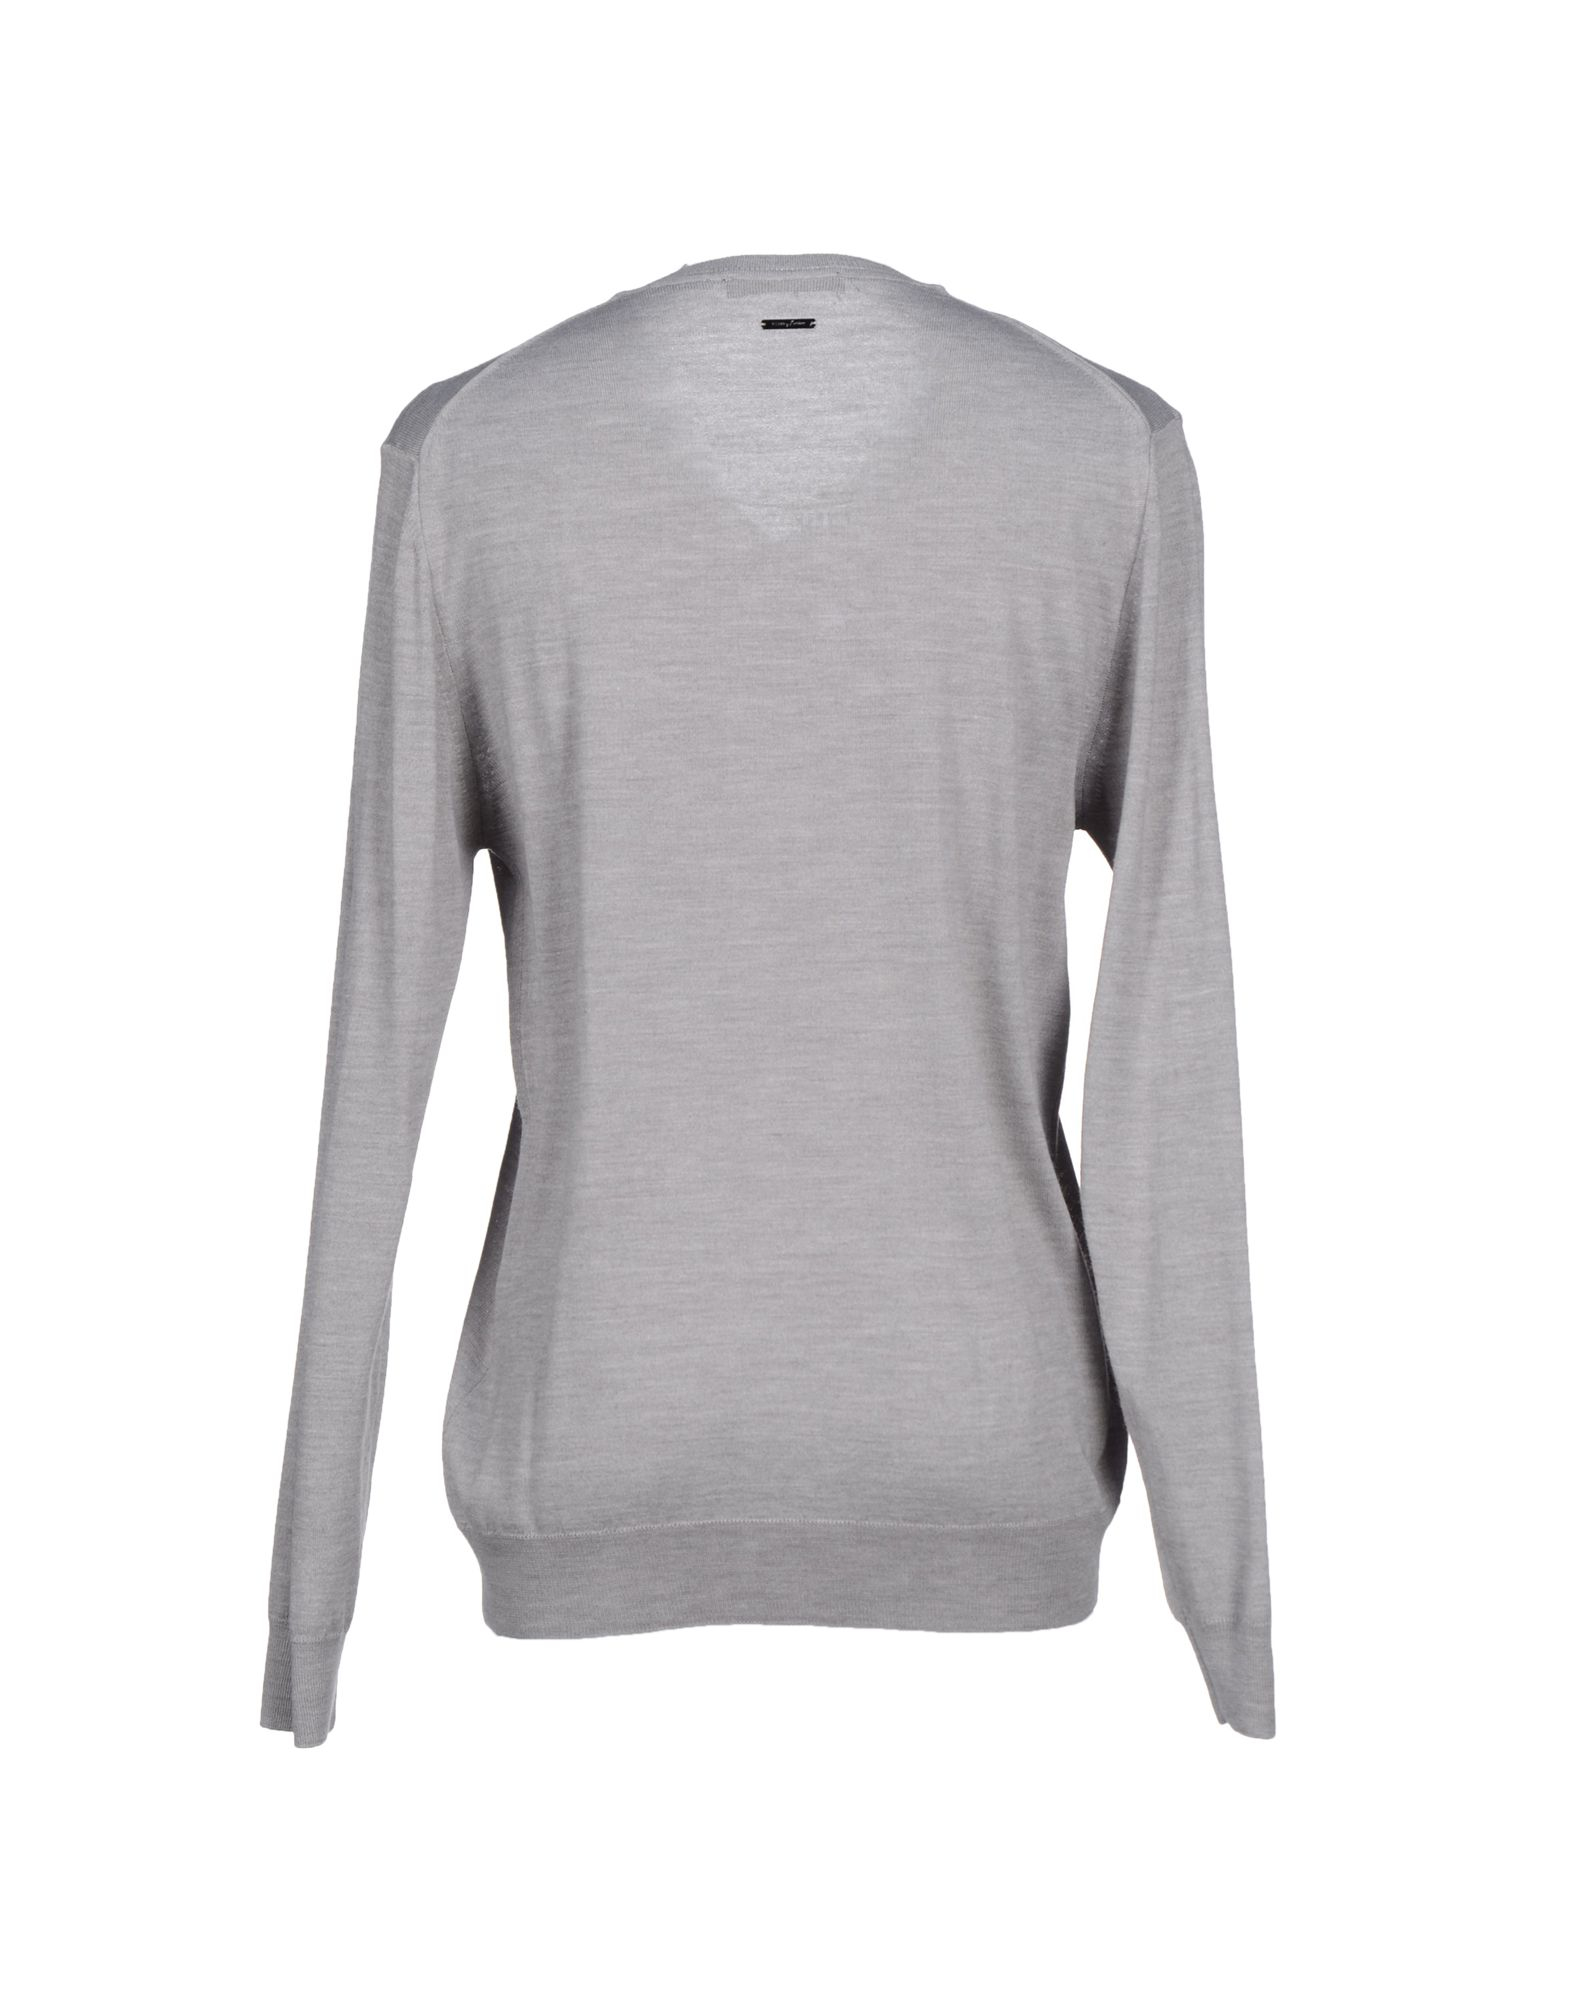 Lyst - Guess Jumper in Gray for Men